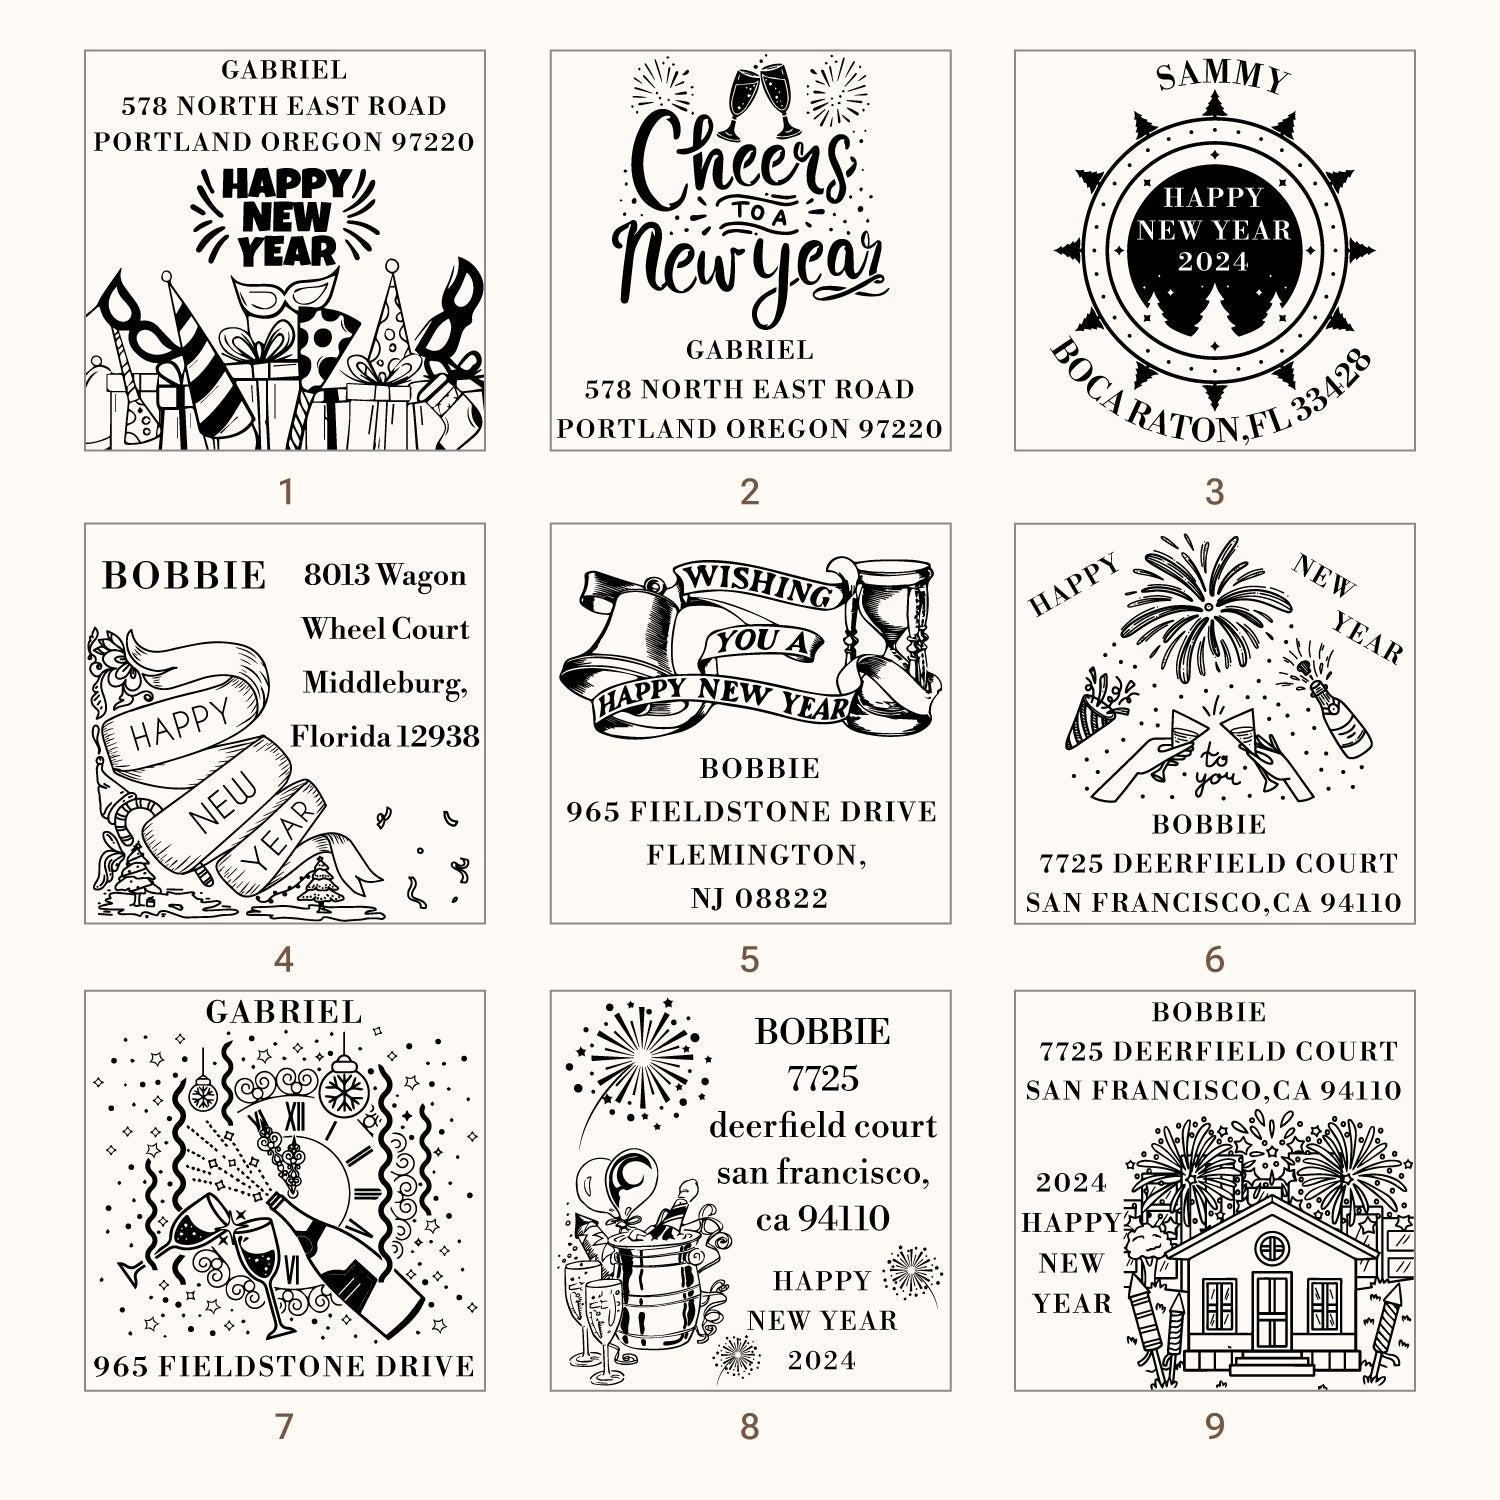 Happy New Year Square Address Rubber Stamp (27 Designs)4